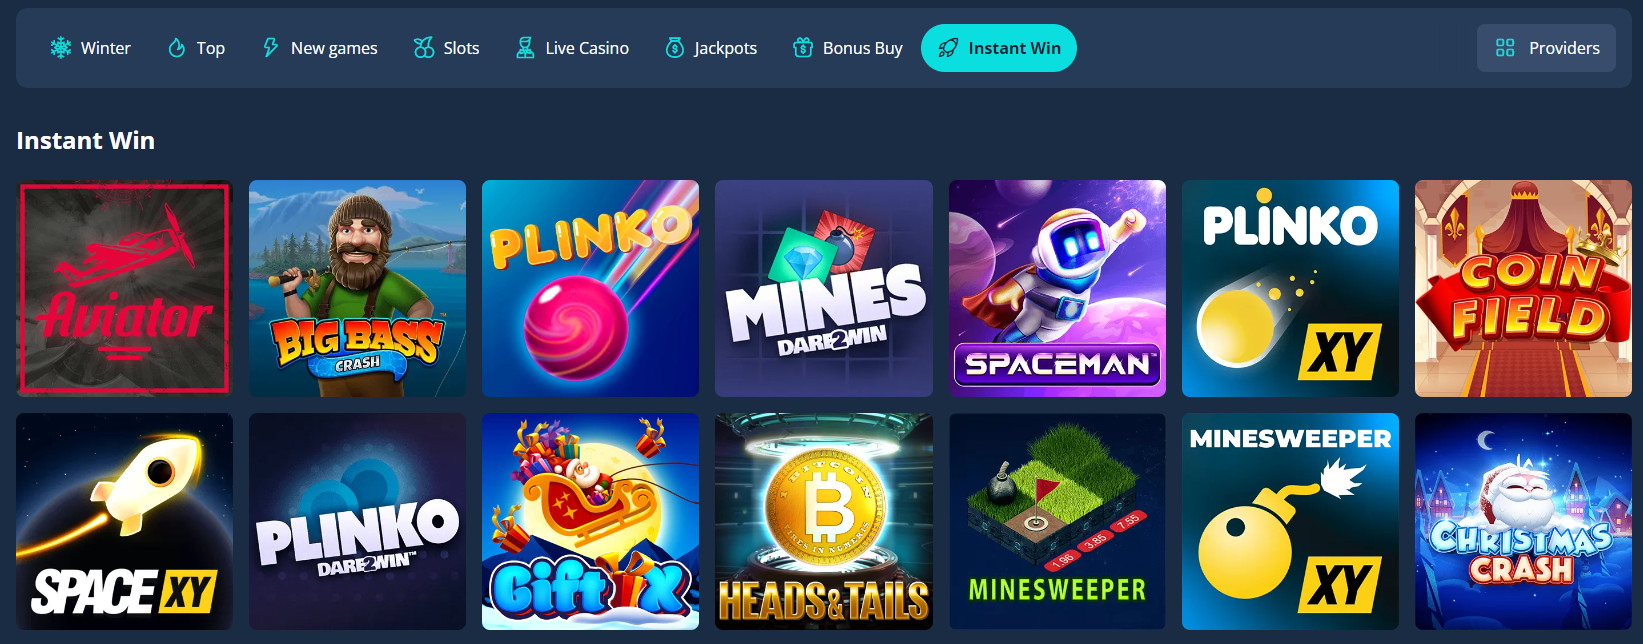 Special Games Section at Platincasino